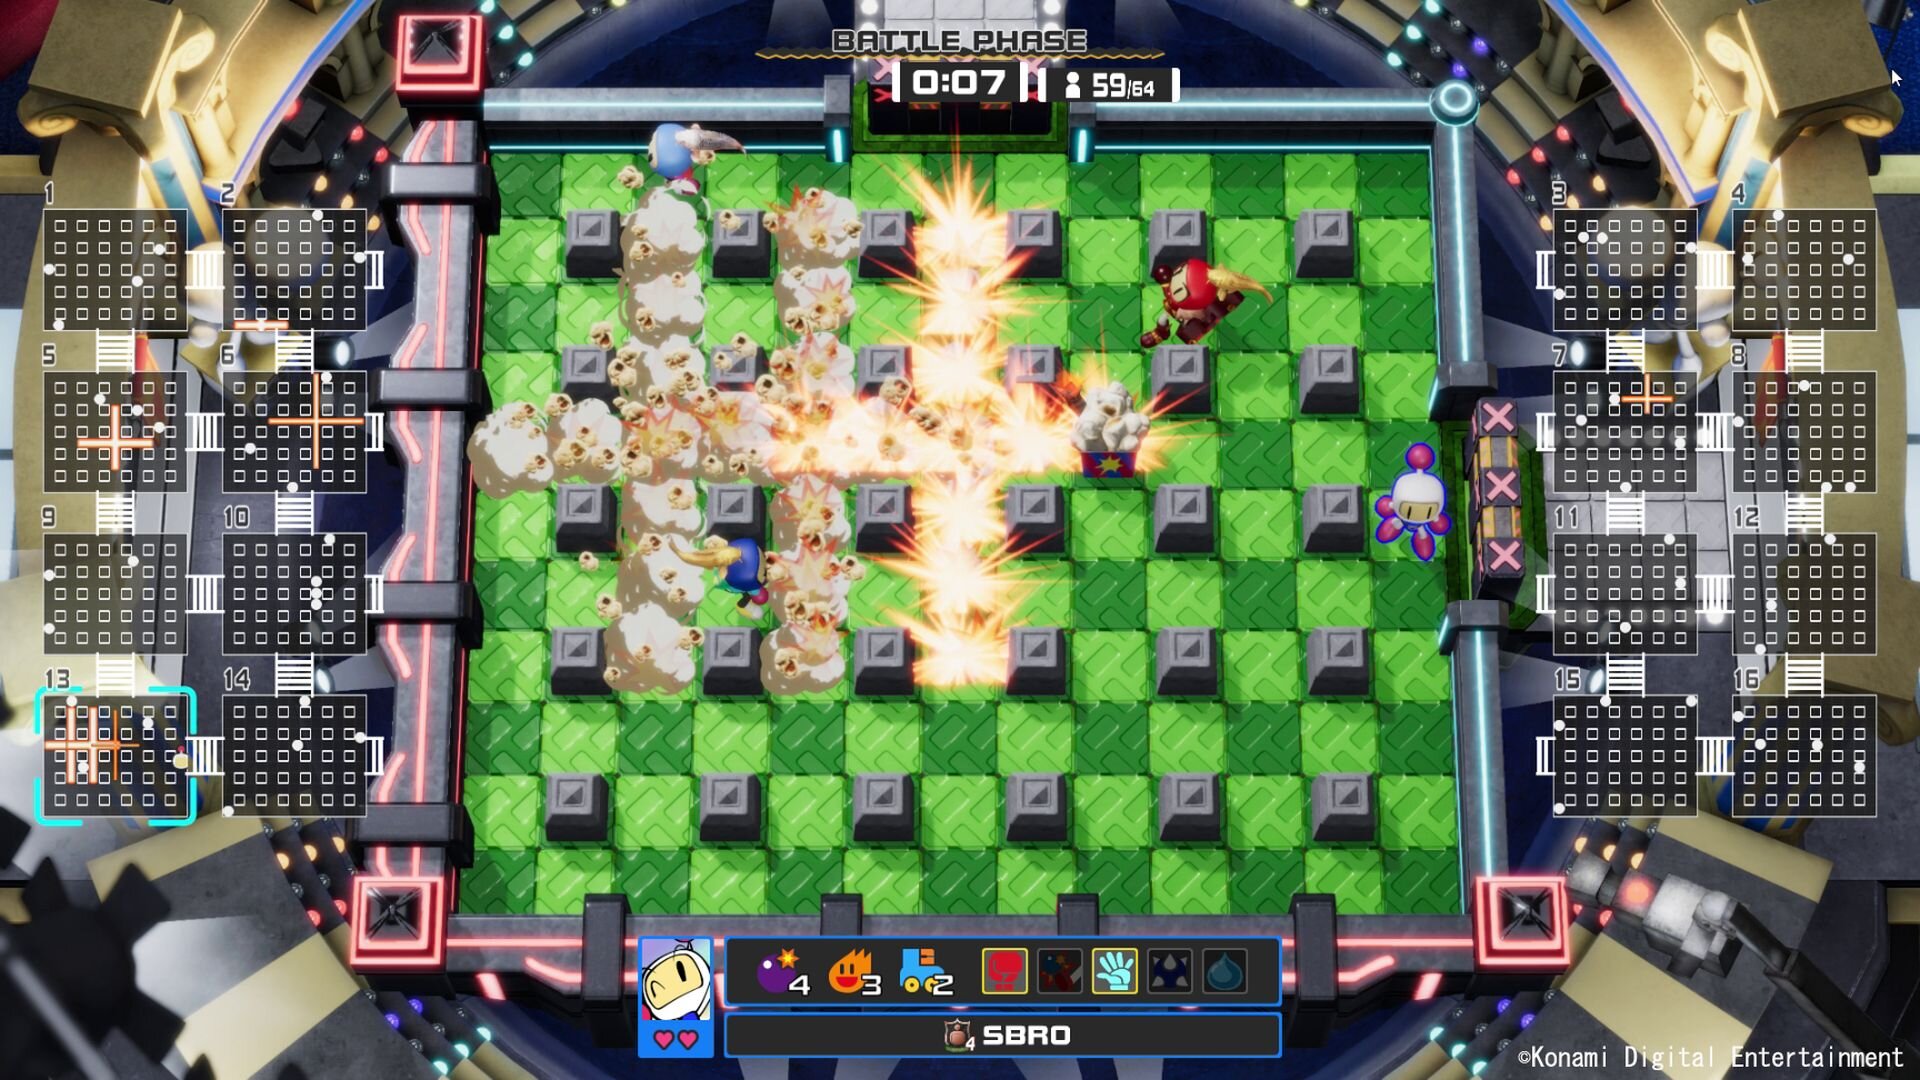 Review: SUPER BOMBERMAN R ONLINE is Fun on More Platforms Now